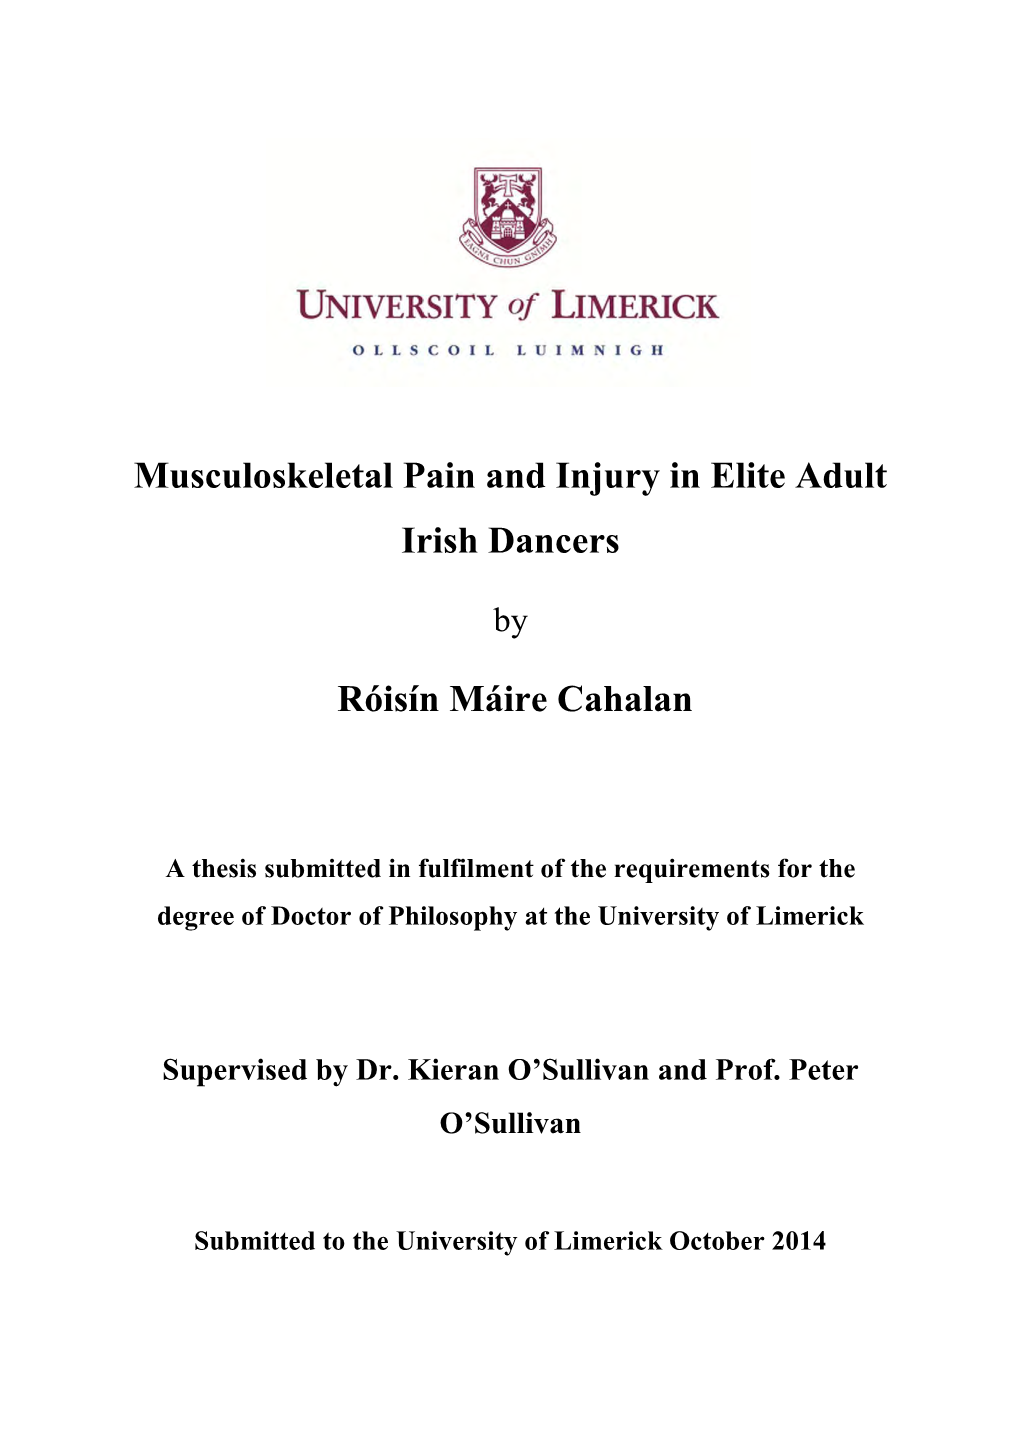 Musculoskeletal Pain and Injury in Elite Adult Irish Dancers Róisín